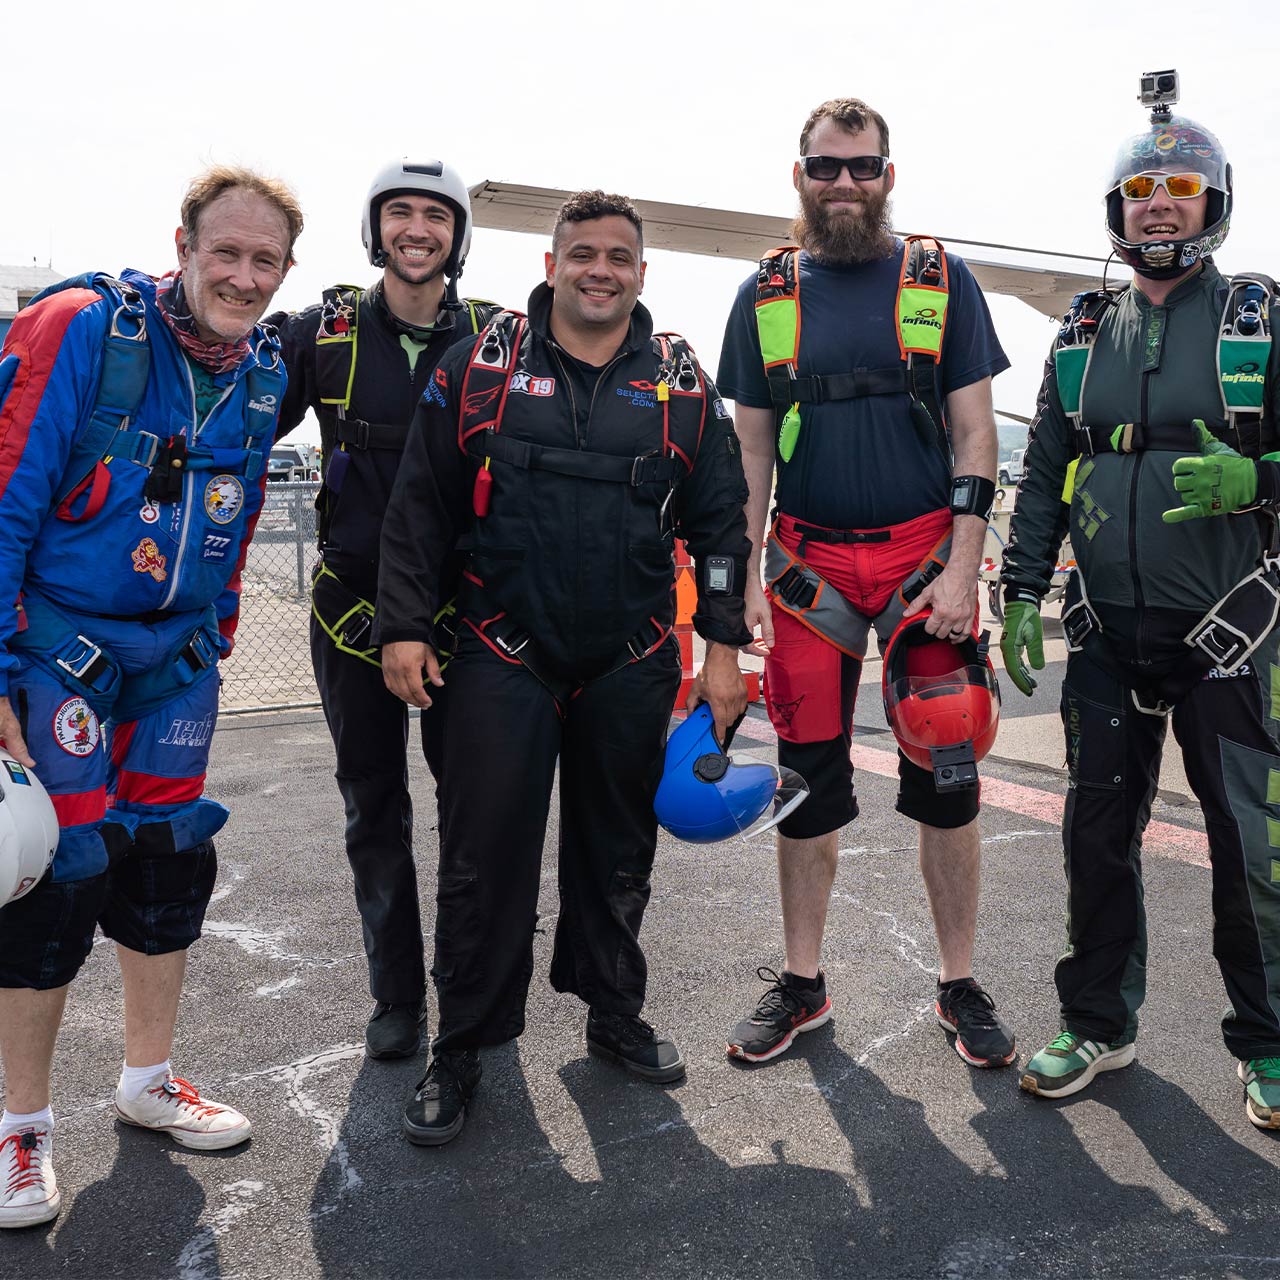 A group of licensed skydivers wearing skydiving rigs smile and pose for a photo